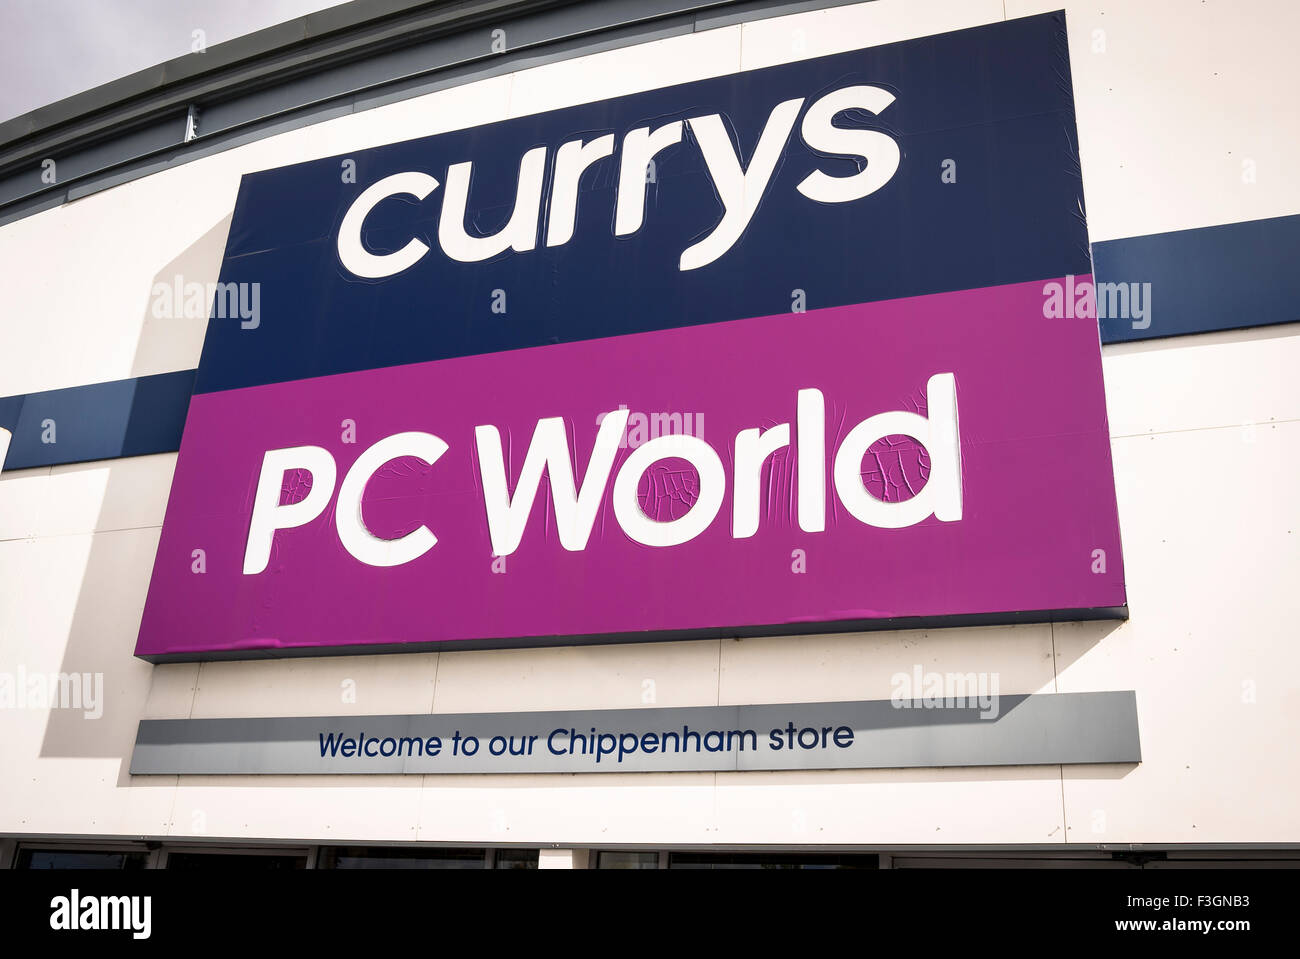 CURRYS PC WORLD store sign in UK Stock Photo